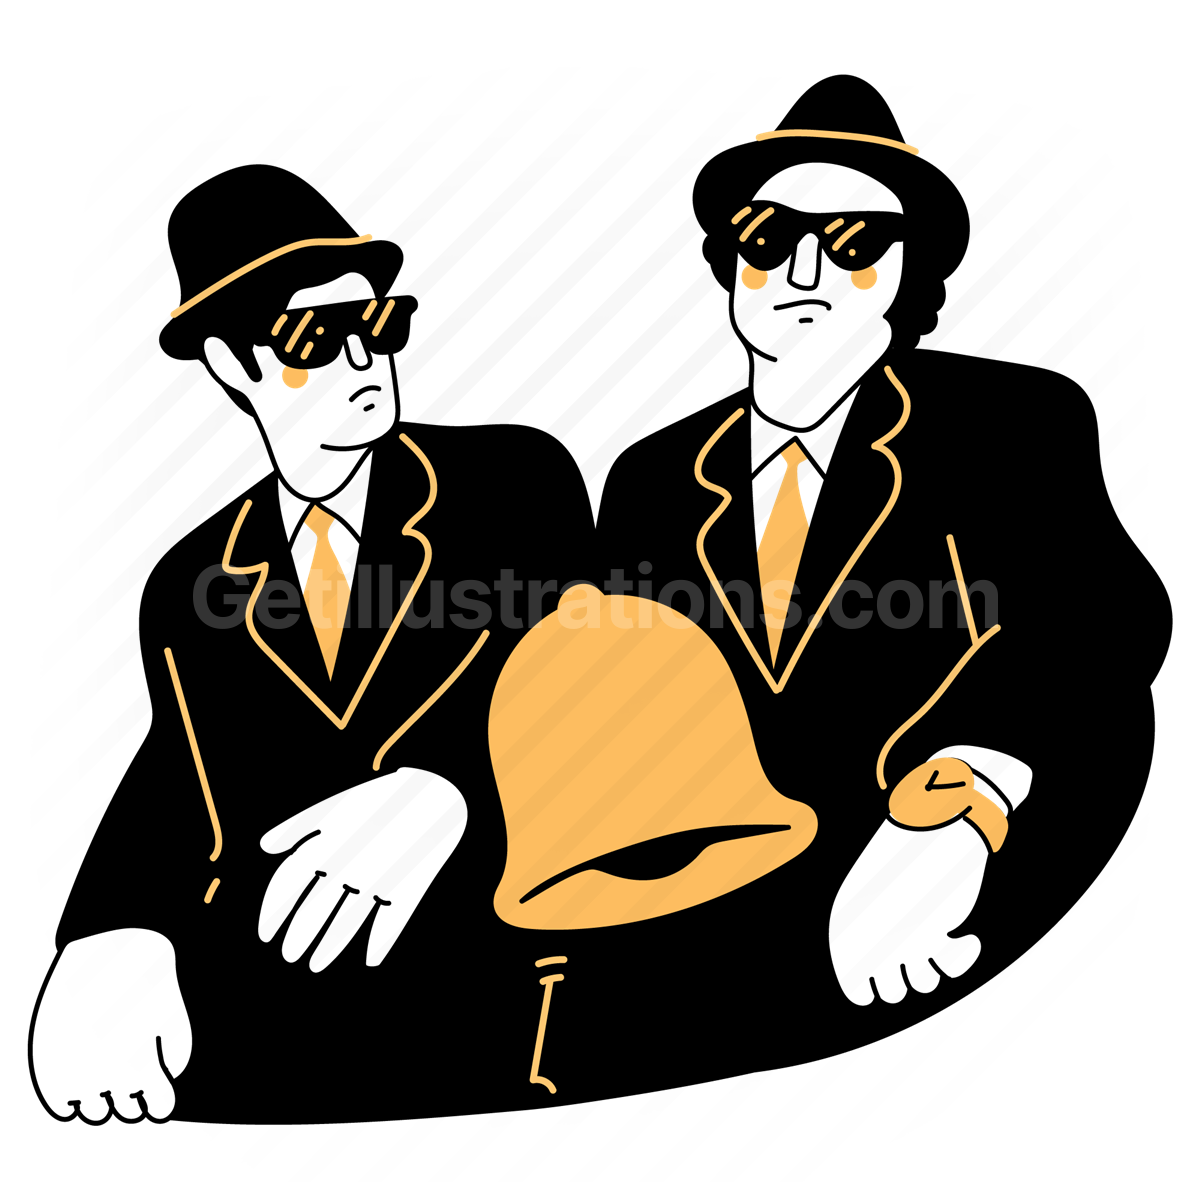 blues brothers, movie, reference, culture, man, bell, ringtone, audio, sound, music